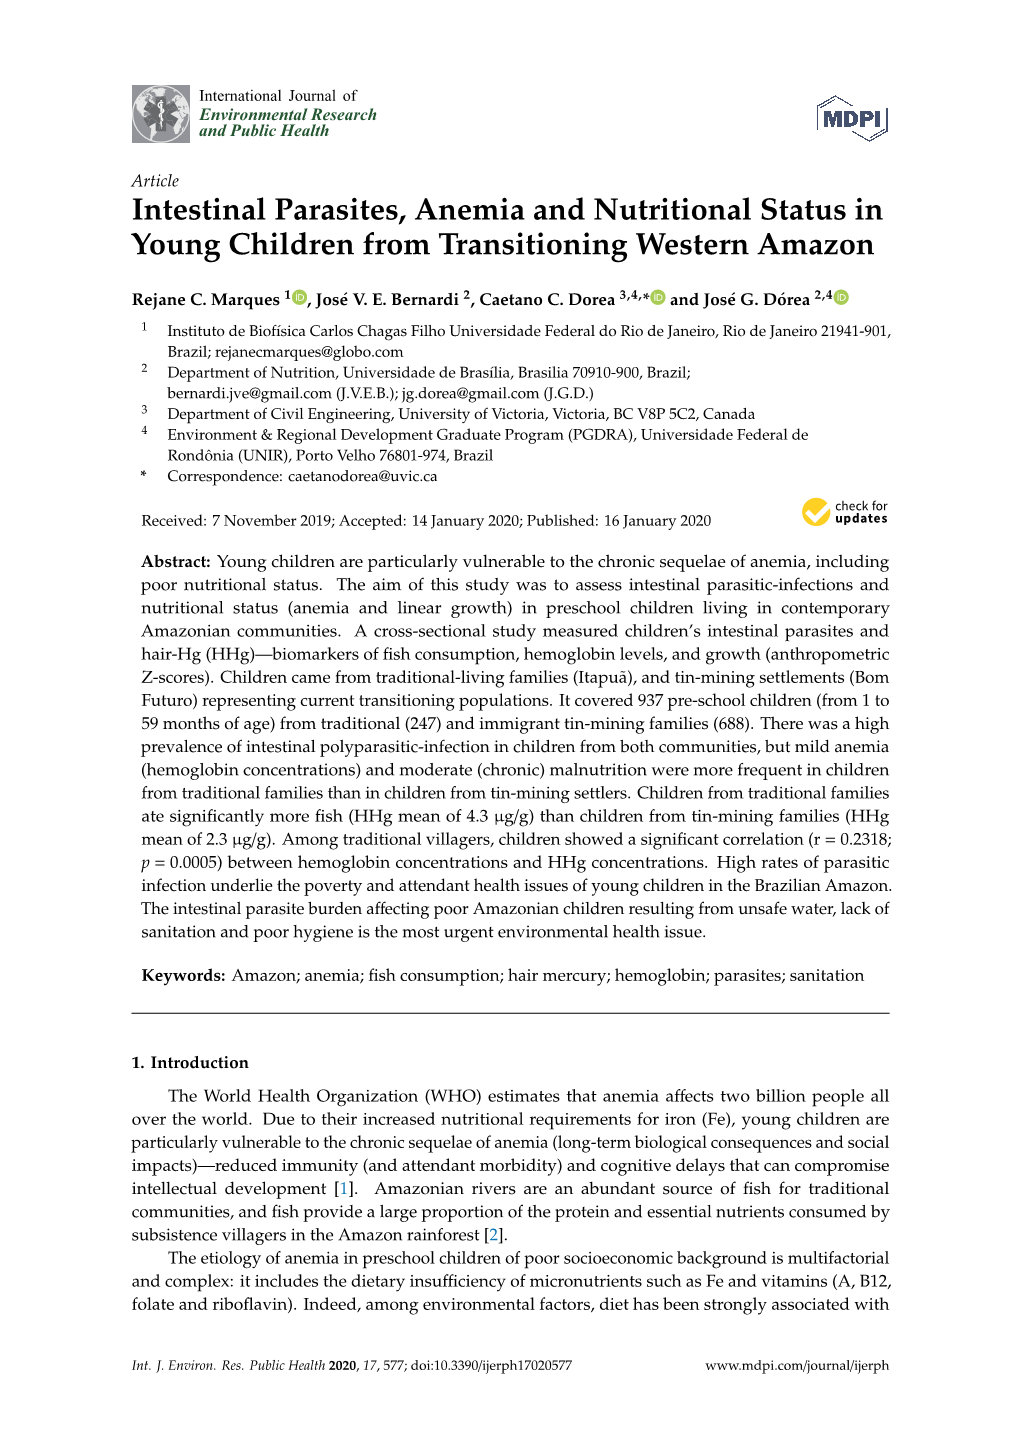 Intestinal Parasites, Anemia and Nutritional Status in Young Children from Transitioning Western Amazon